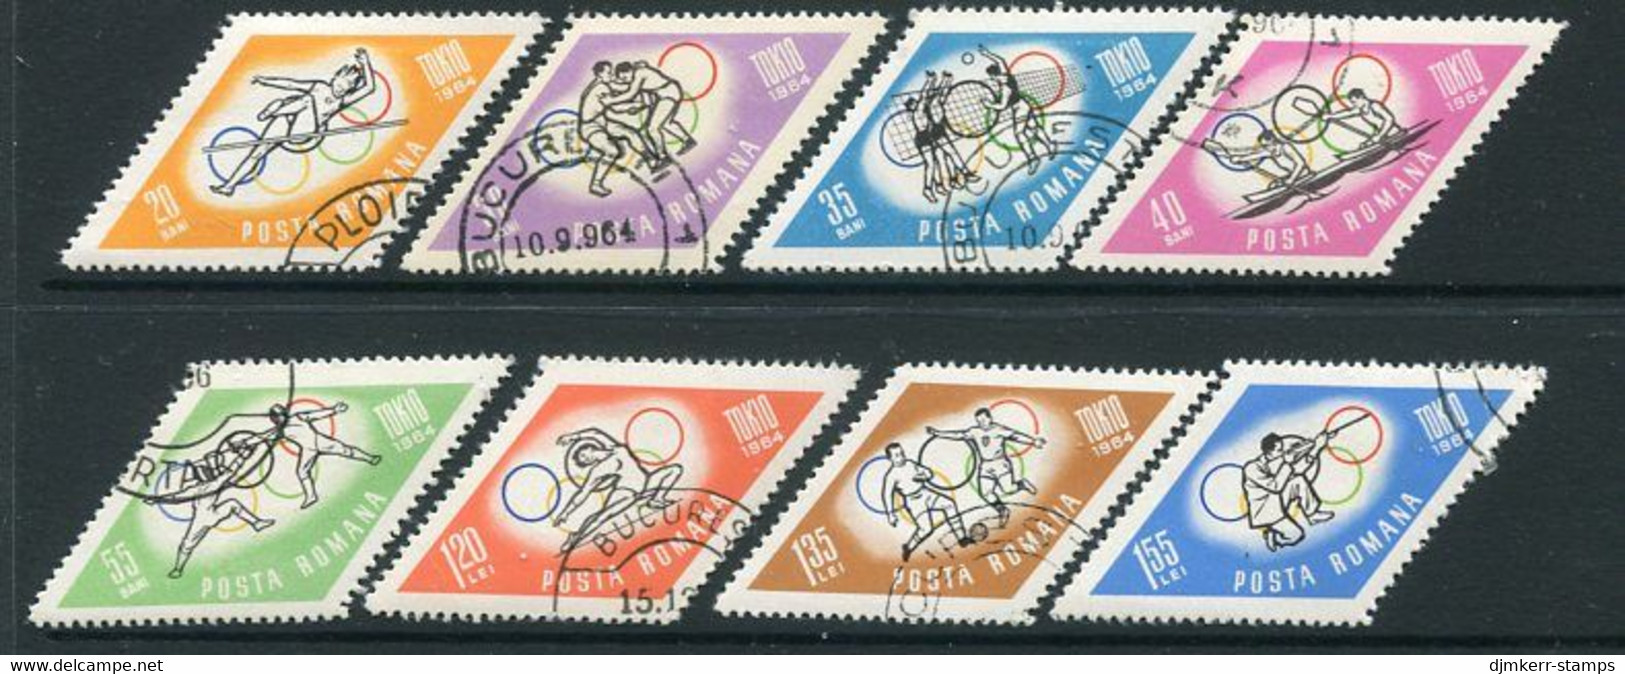 ROMANIA 1964 Tokyo Olympic Games Perforated Used.  Michel 2309-16 - Usado